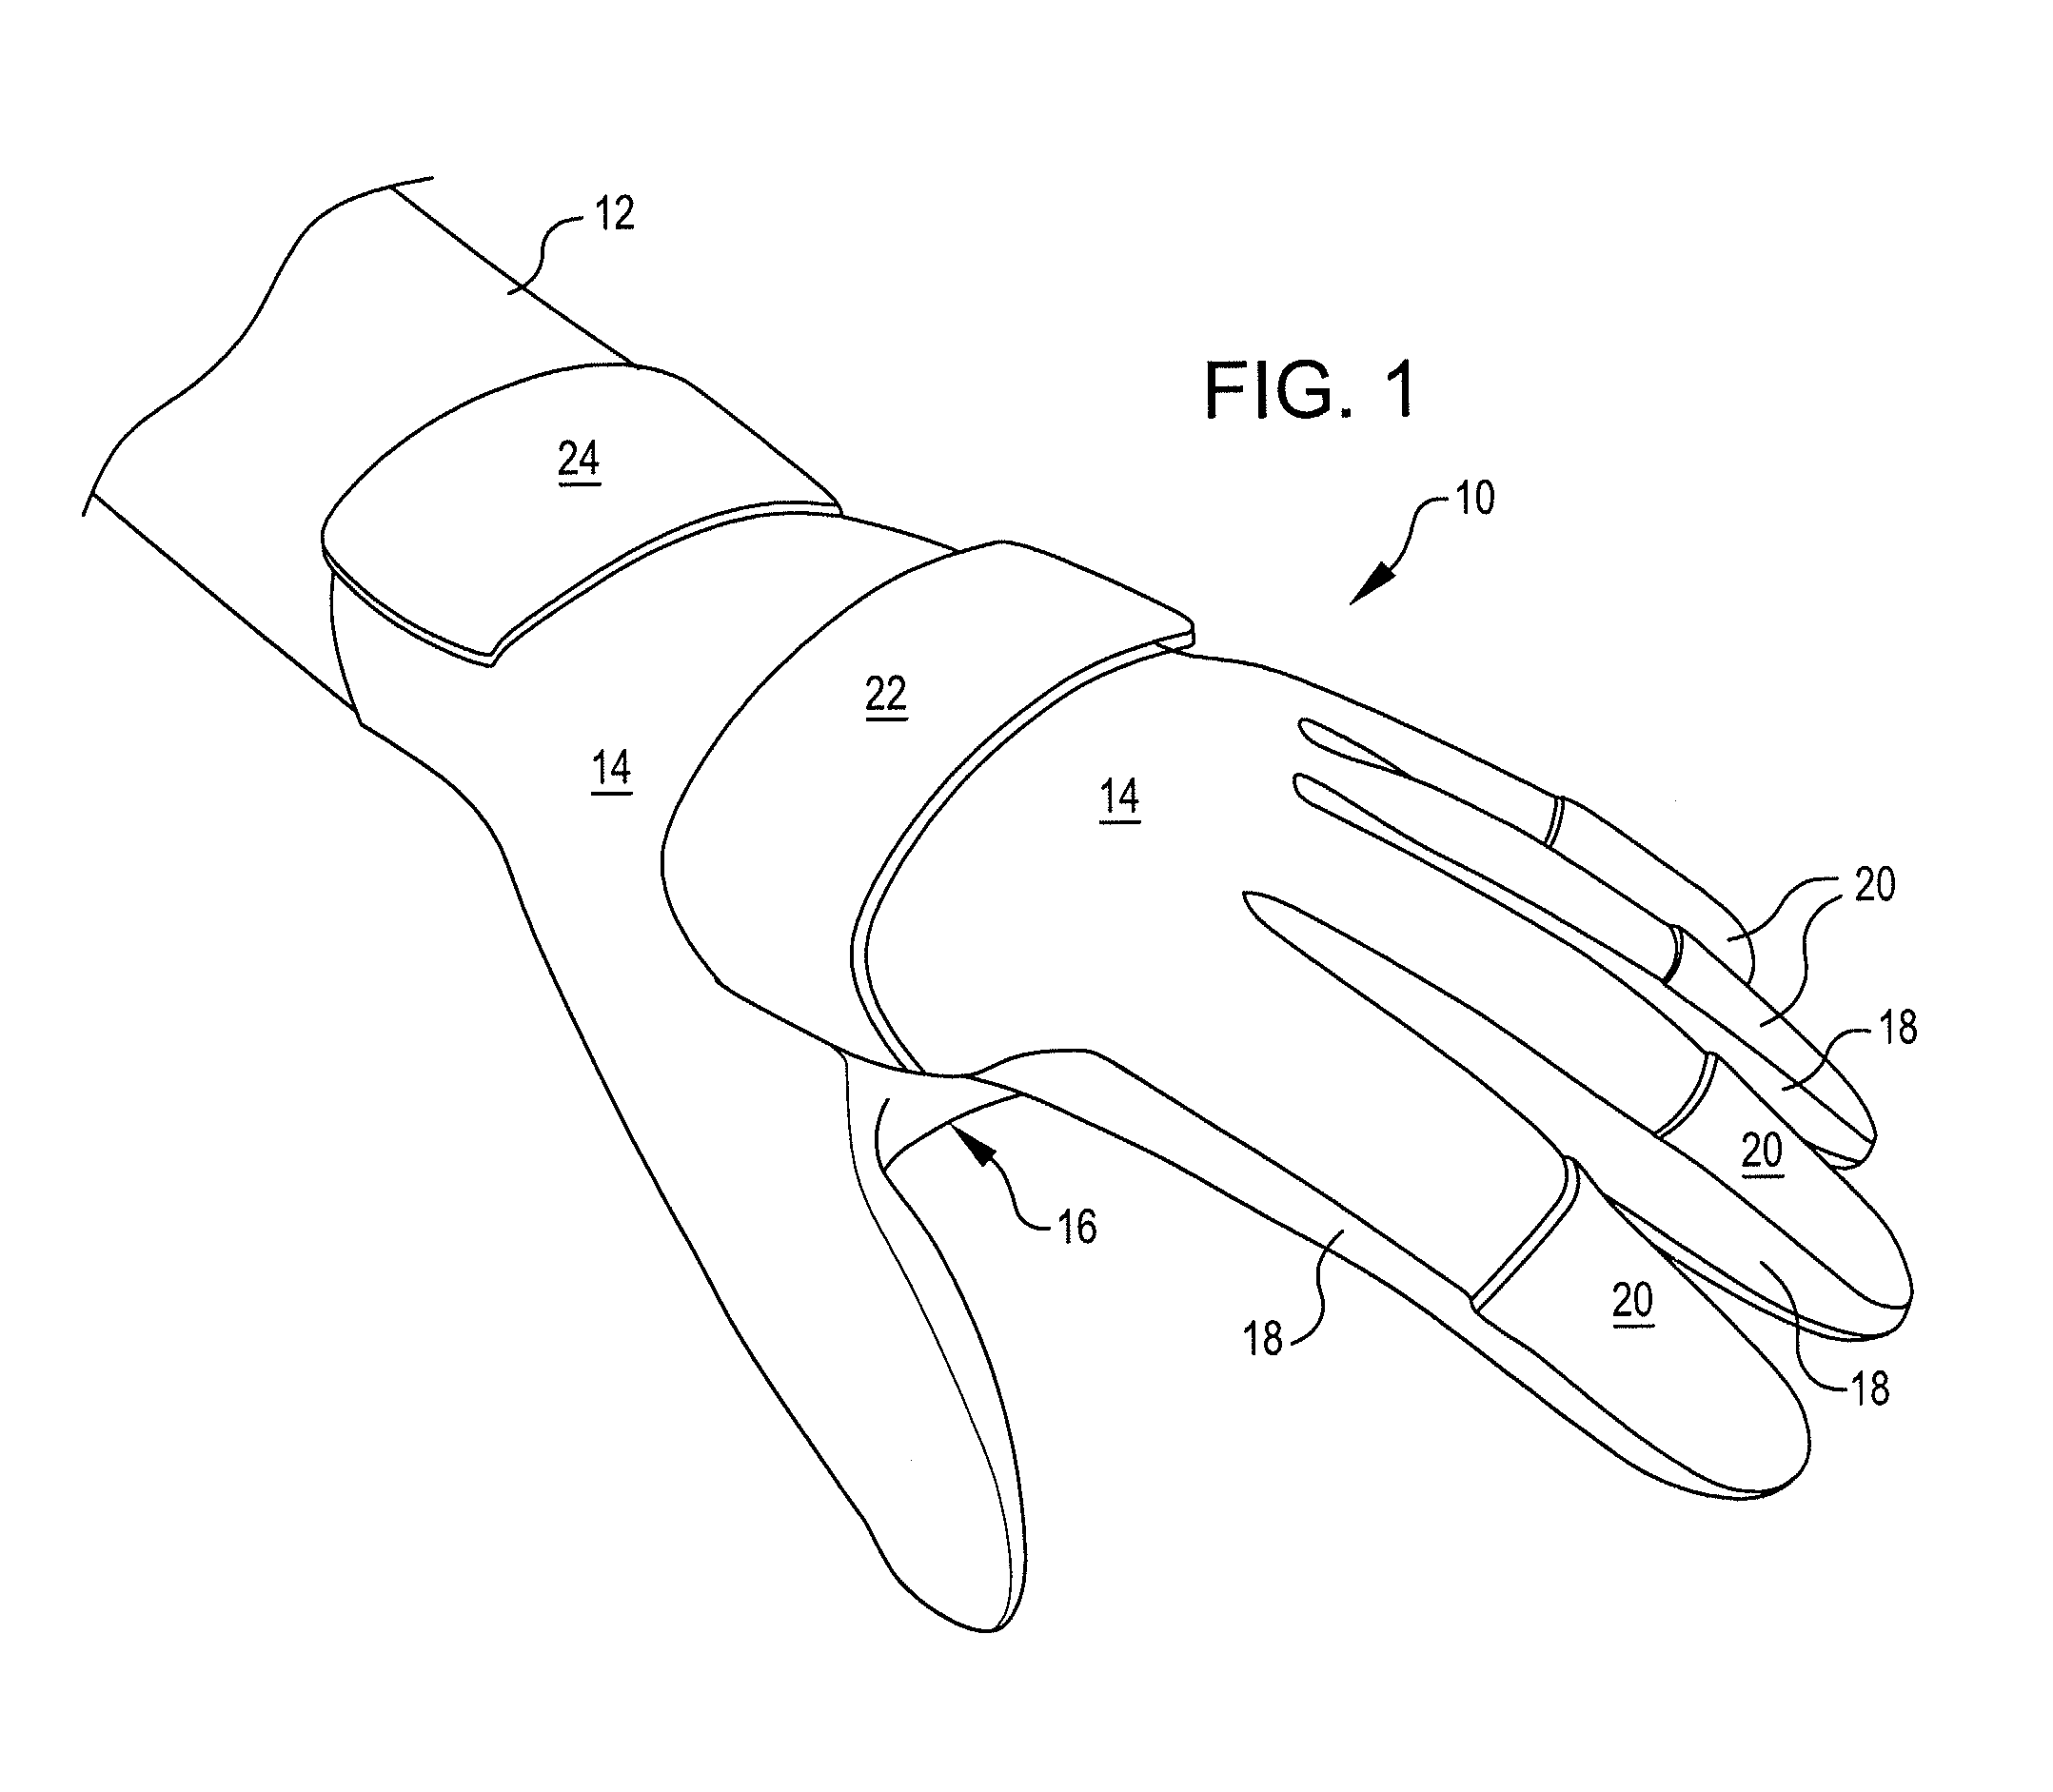 Functional exercise glove and 19+19 degree ergonomic bracing devices